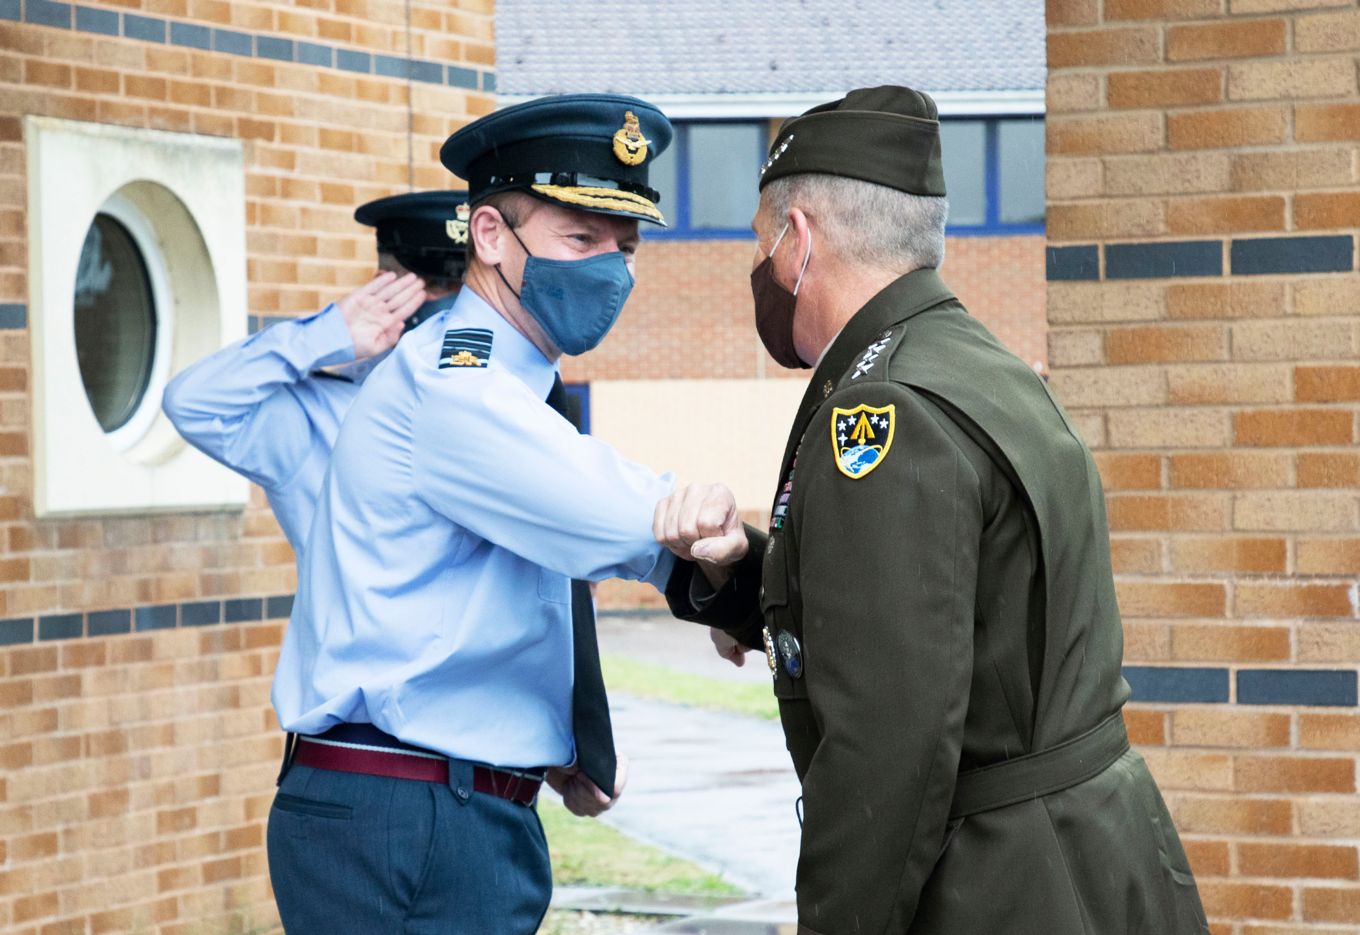 General James H. Dickinson and Chief of the Air Staff, Air Chief Marshal Sir Mike Wigston touch elbows.